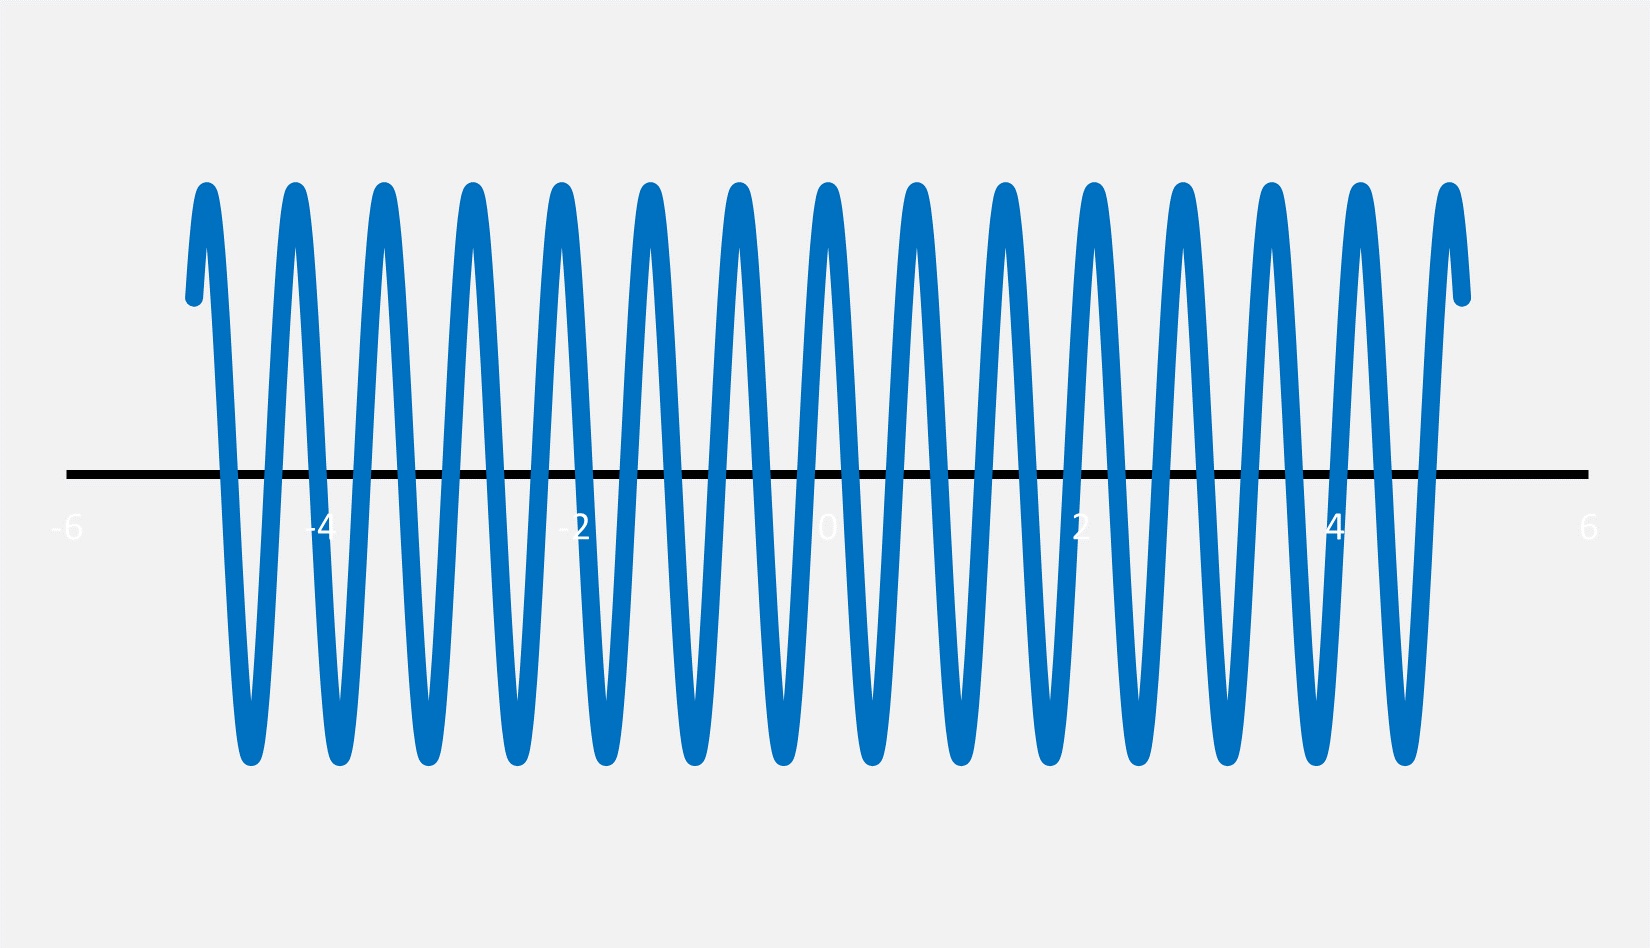 An acoustic wave on a white background.